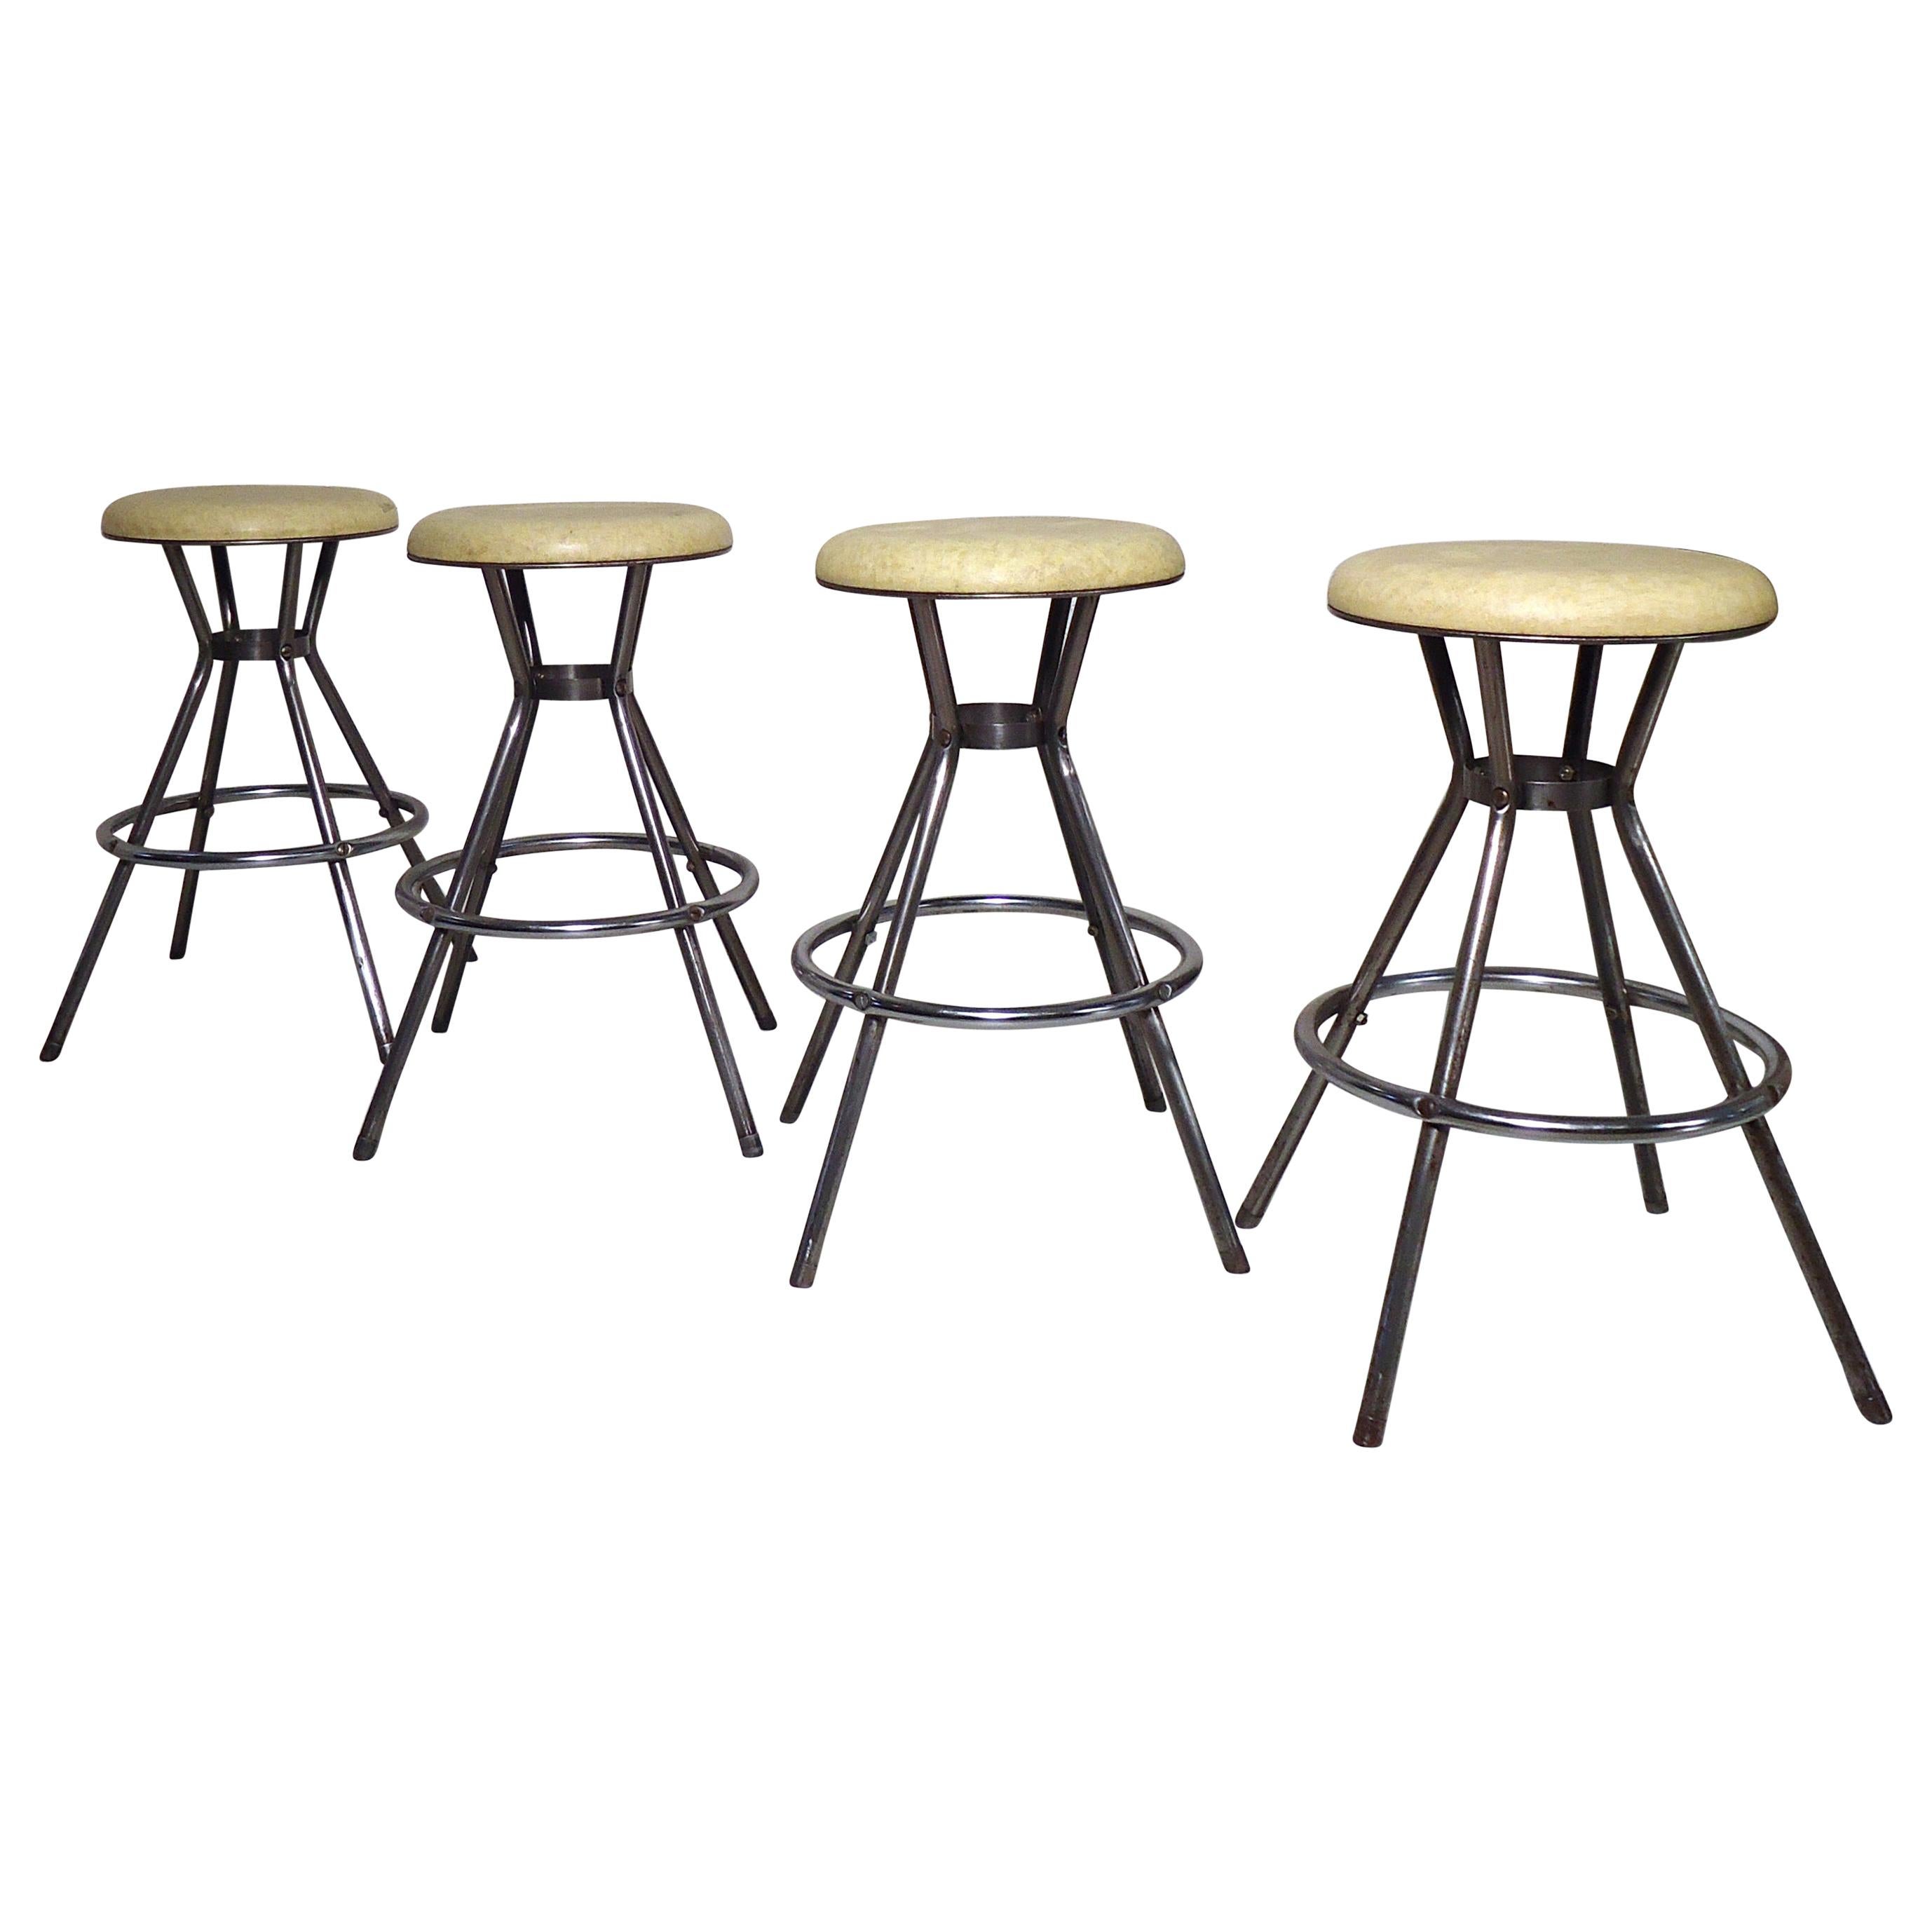 Set of Four Industrial Stools by Cosco